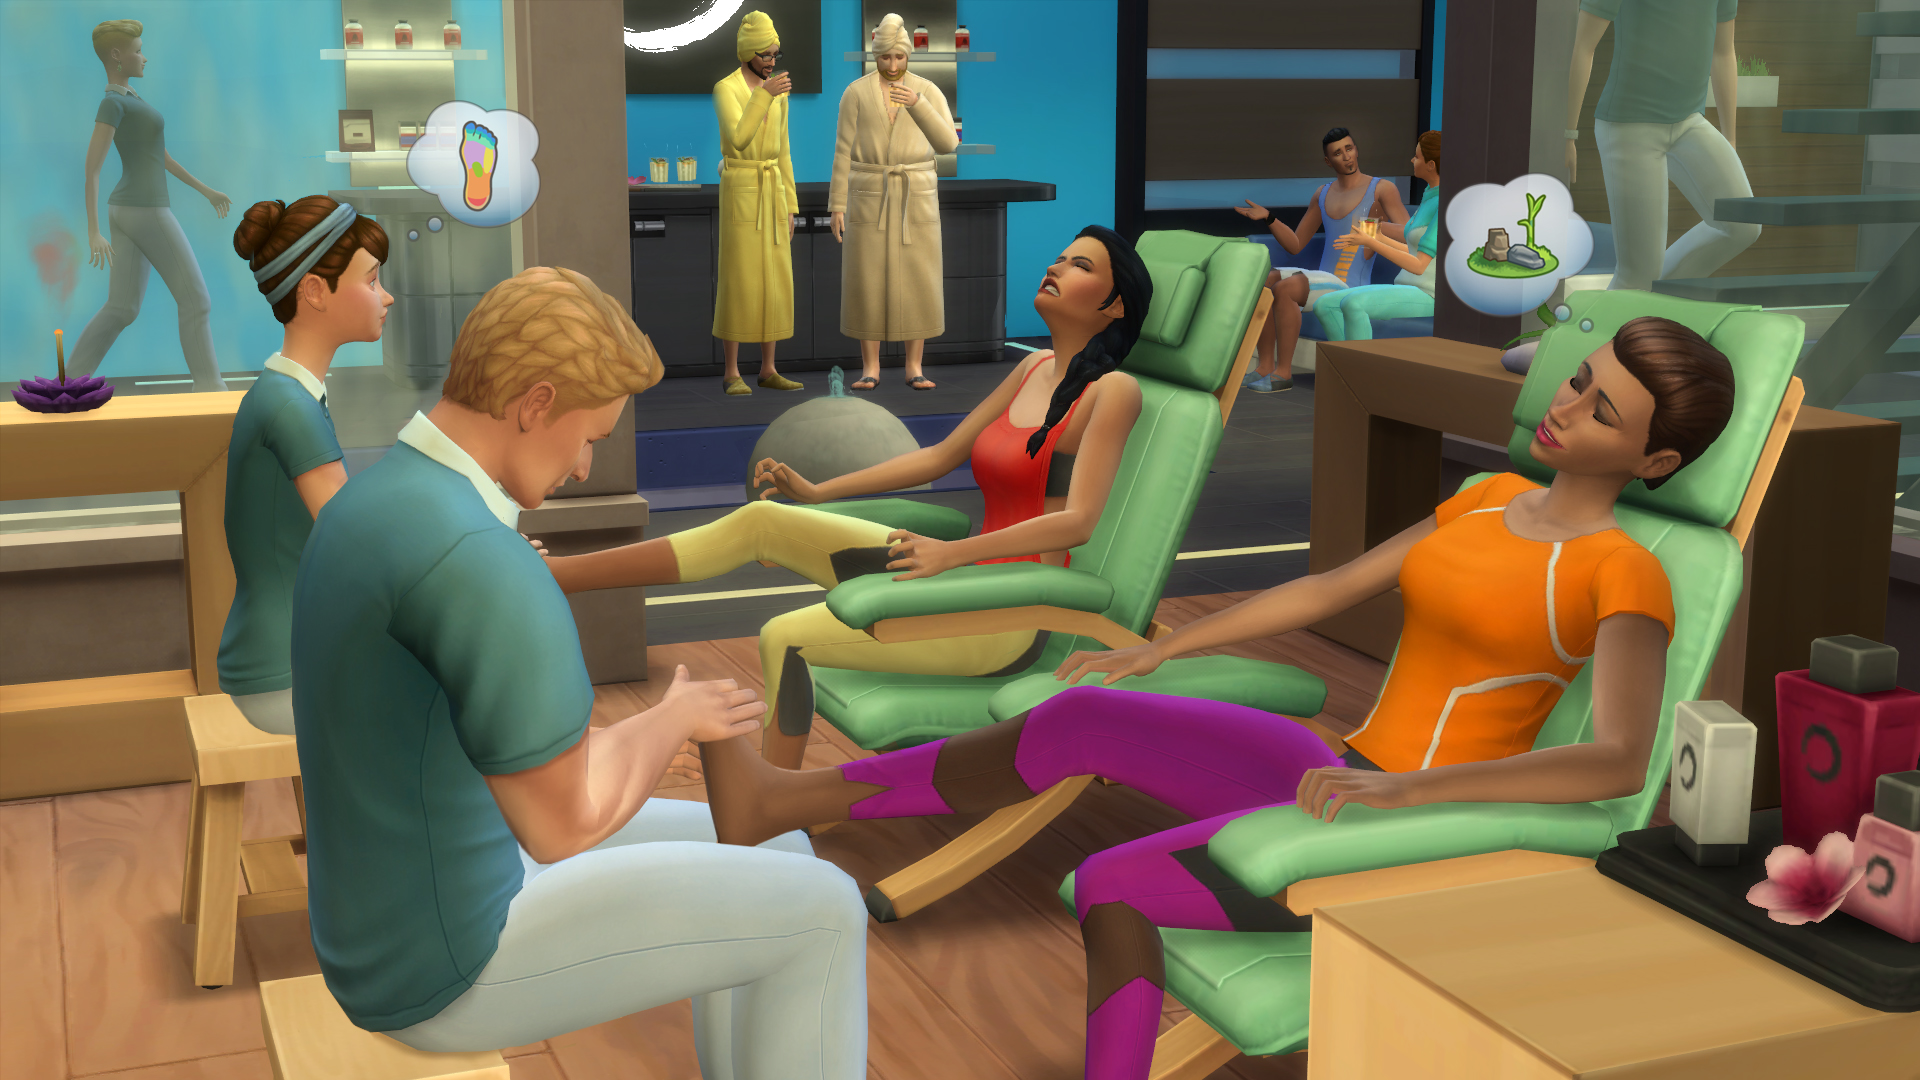 The Sims 4: Spa Day | The Sims Wiki | FANDOM powered by Wikia